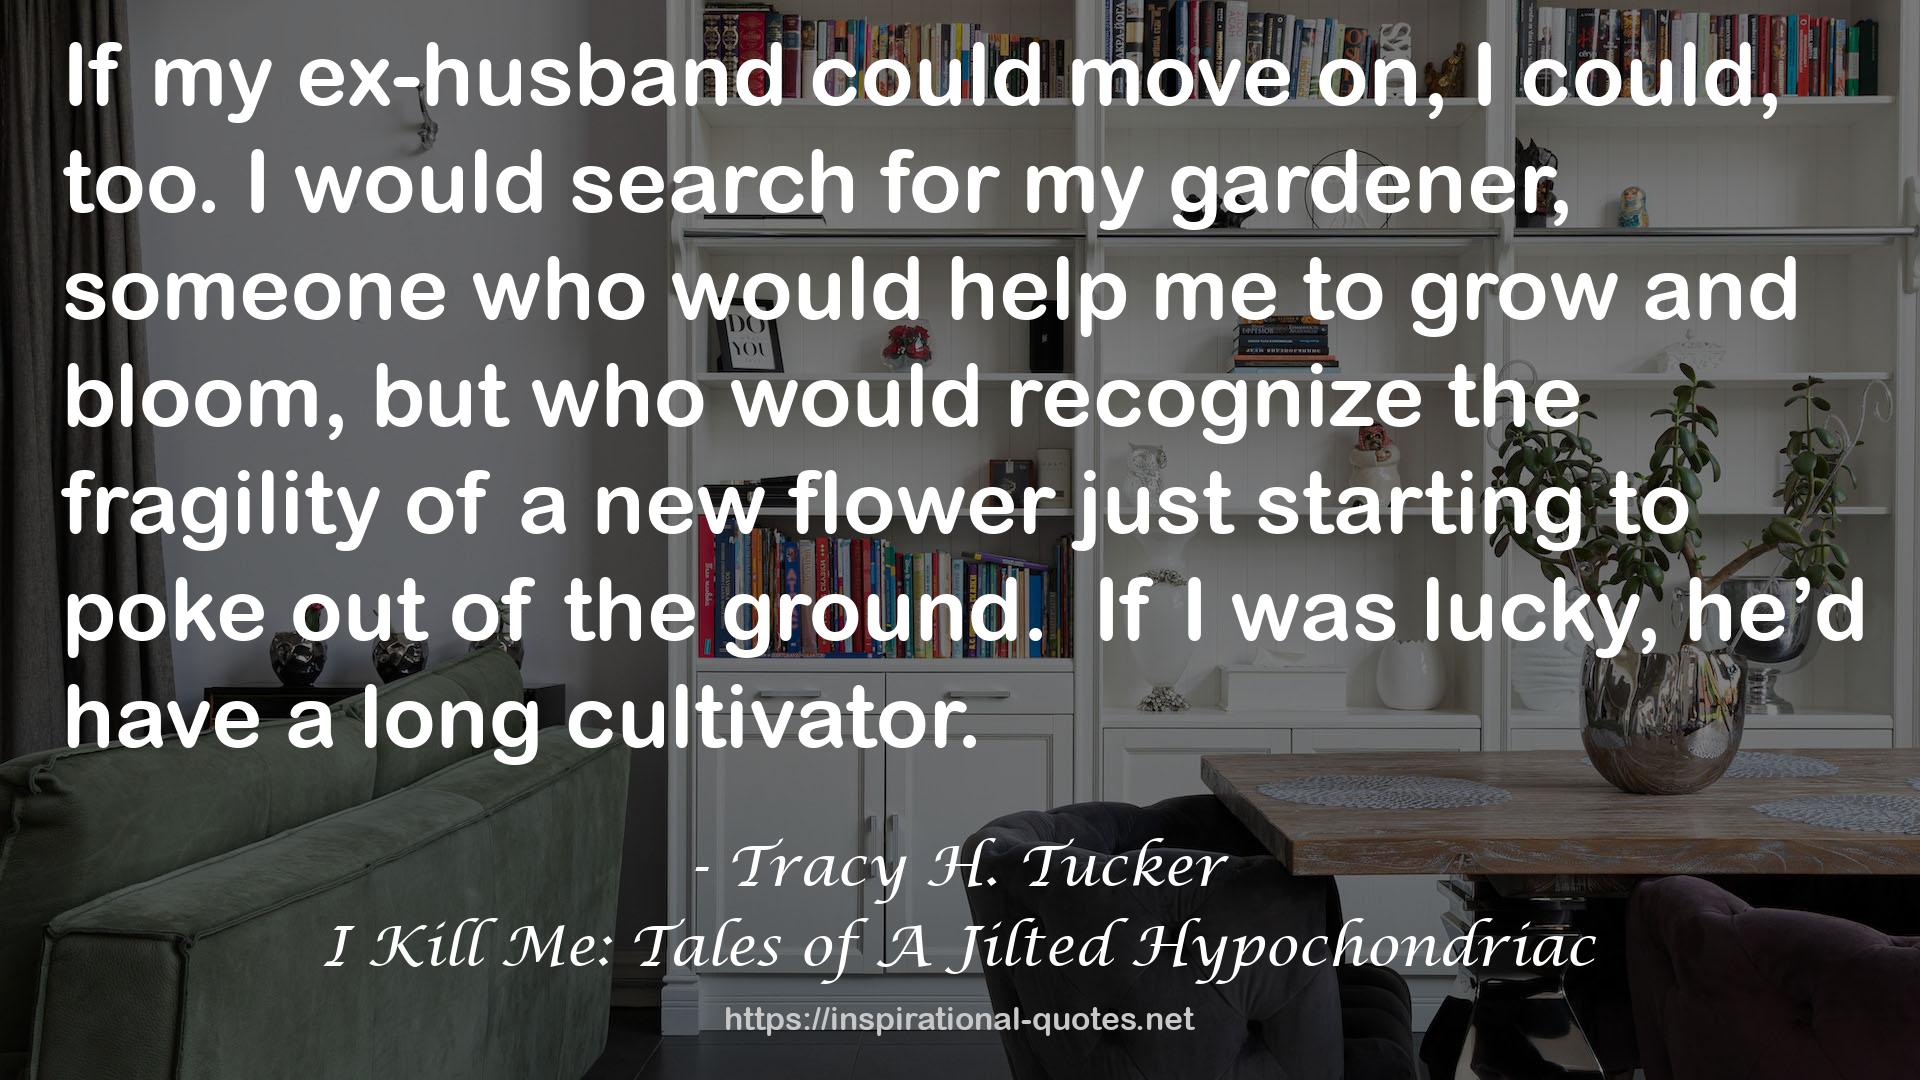 Tracy H. Tucker QUOTES